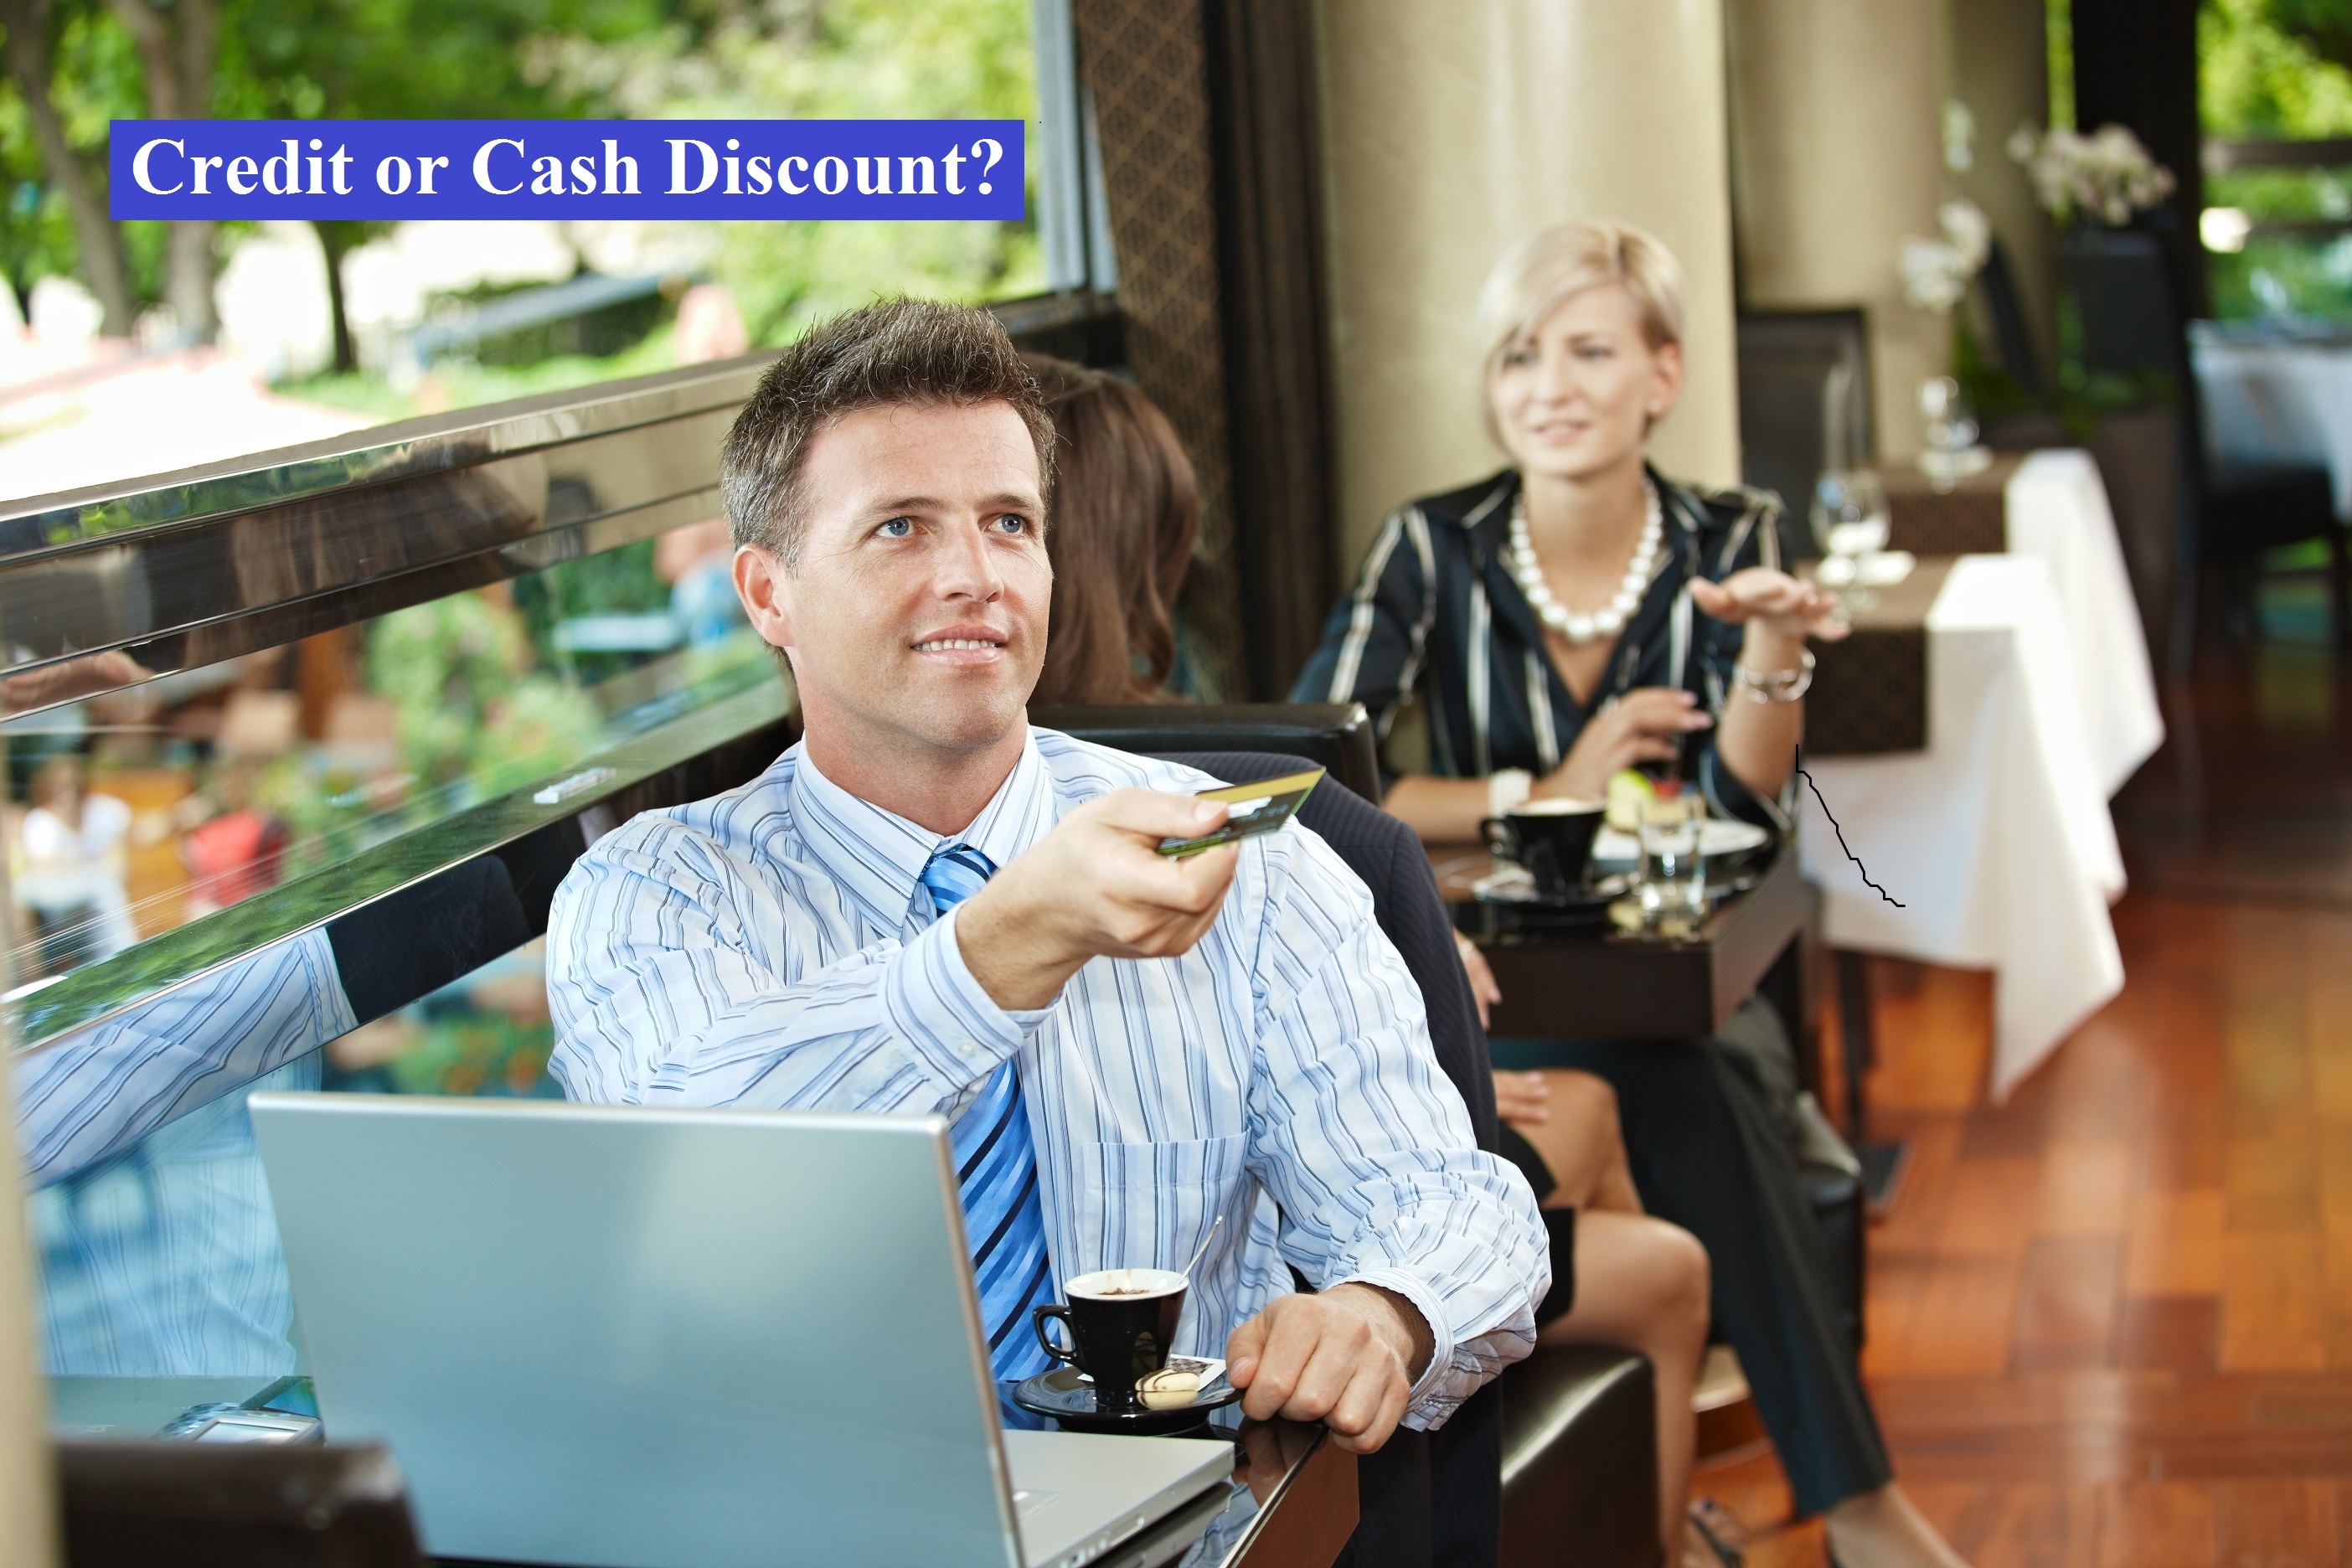 Cash Discounting & Your POS